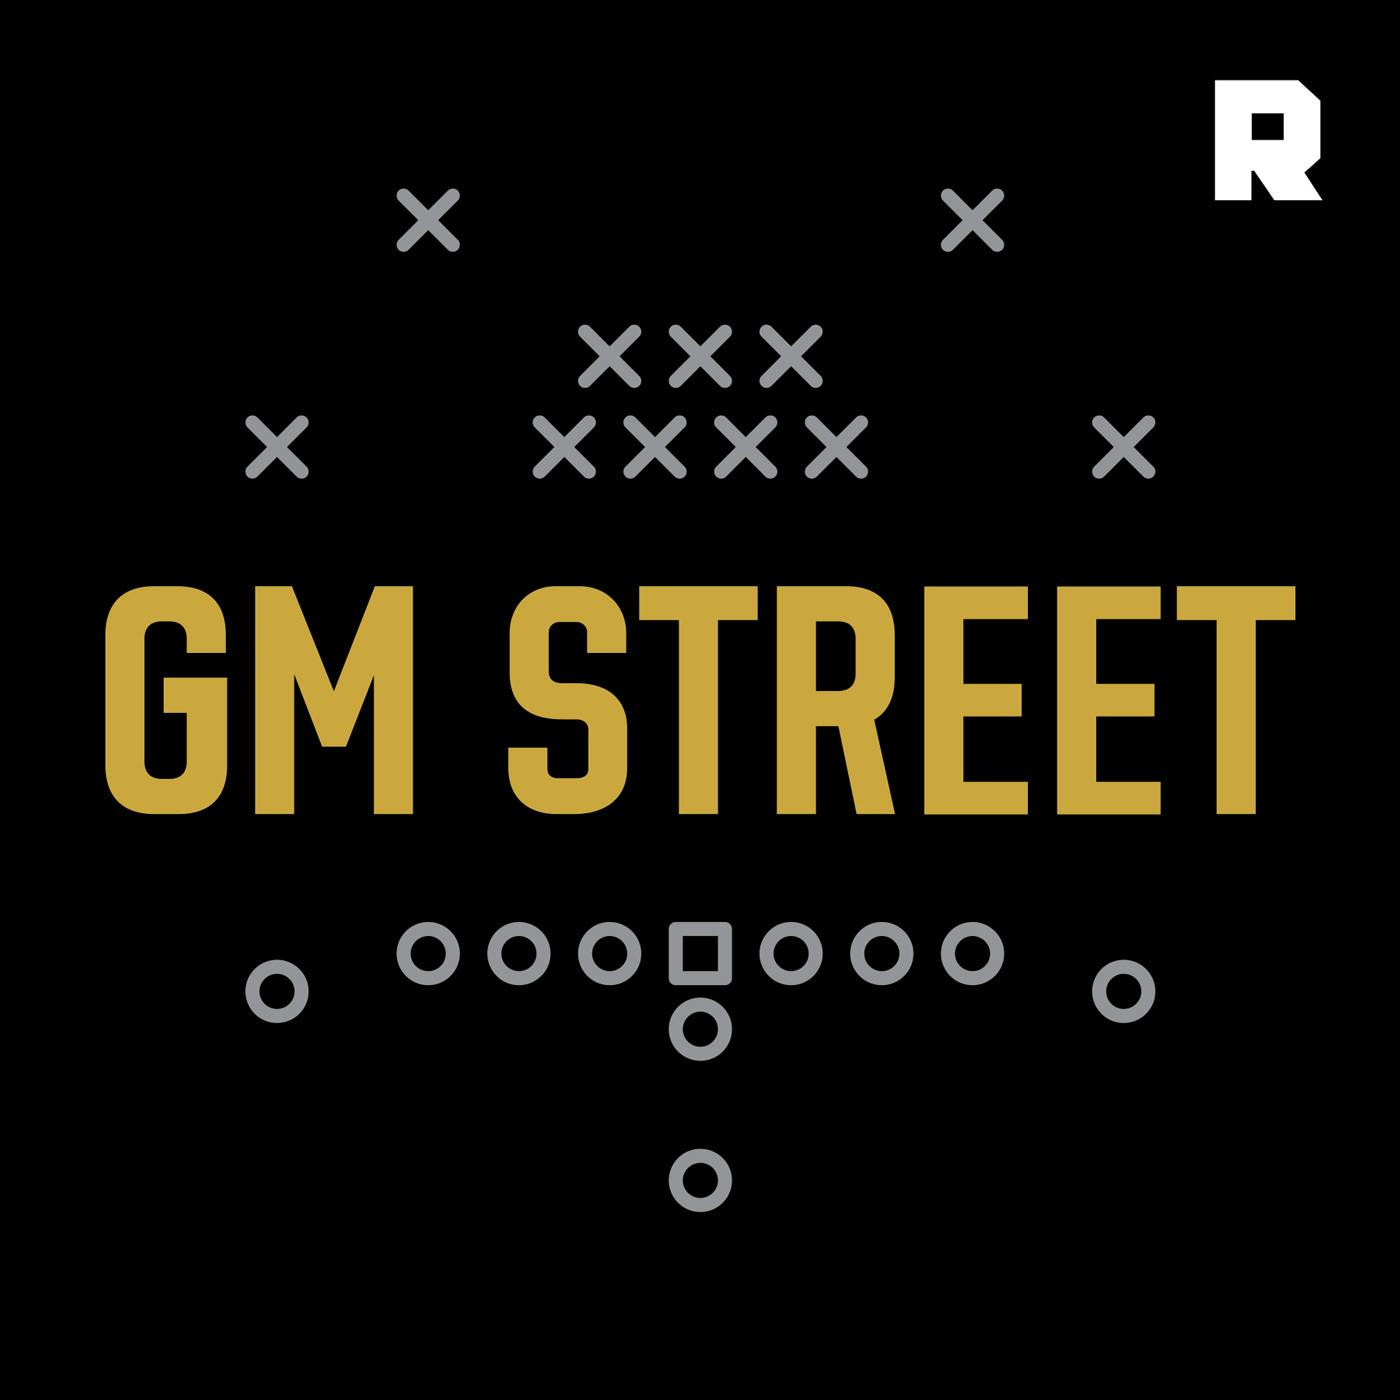 Top 15 Defensive Prospects in the NFL Draft and Draft Rumors (Ep. 258) | GM Street (Ep. 258)